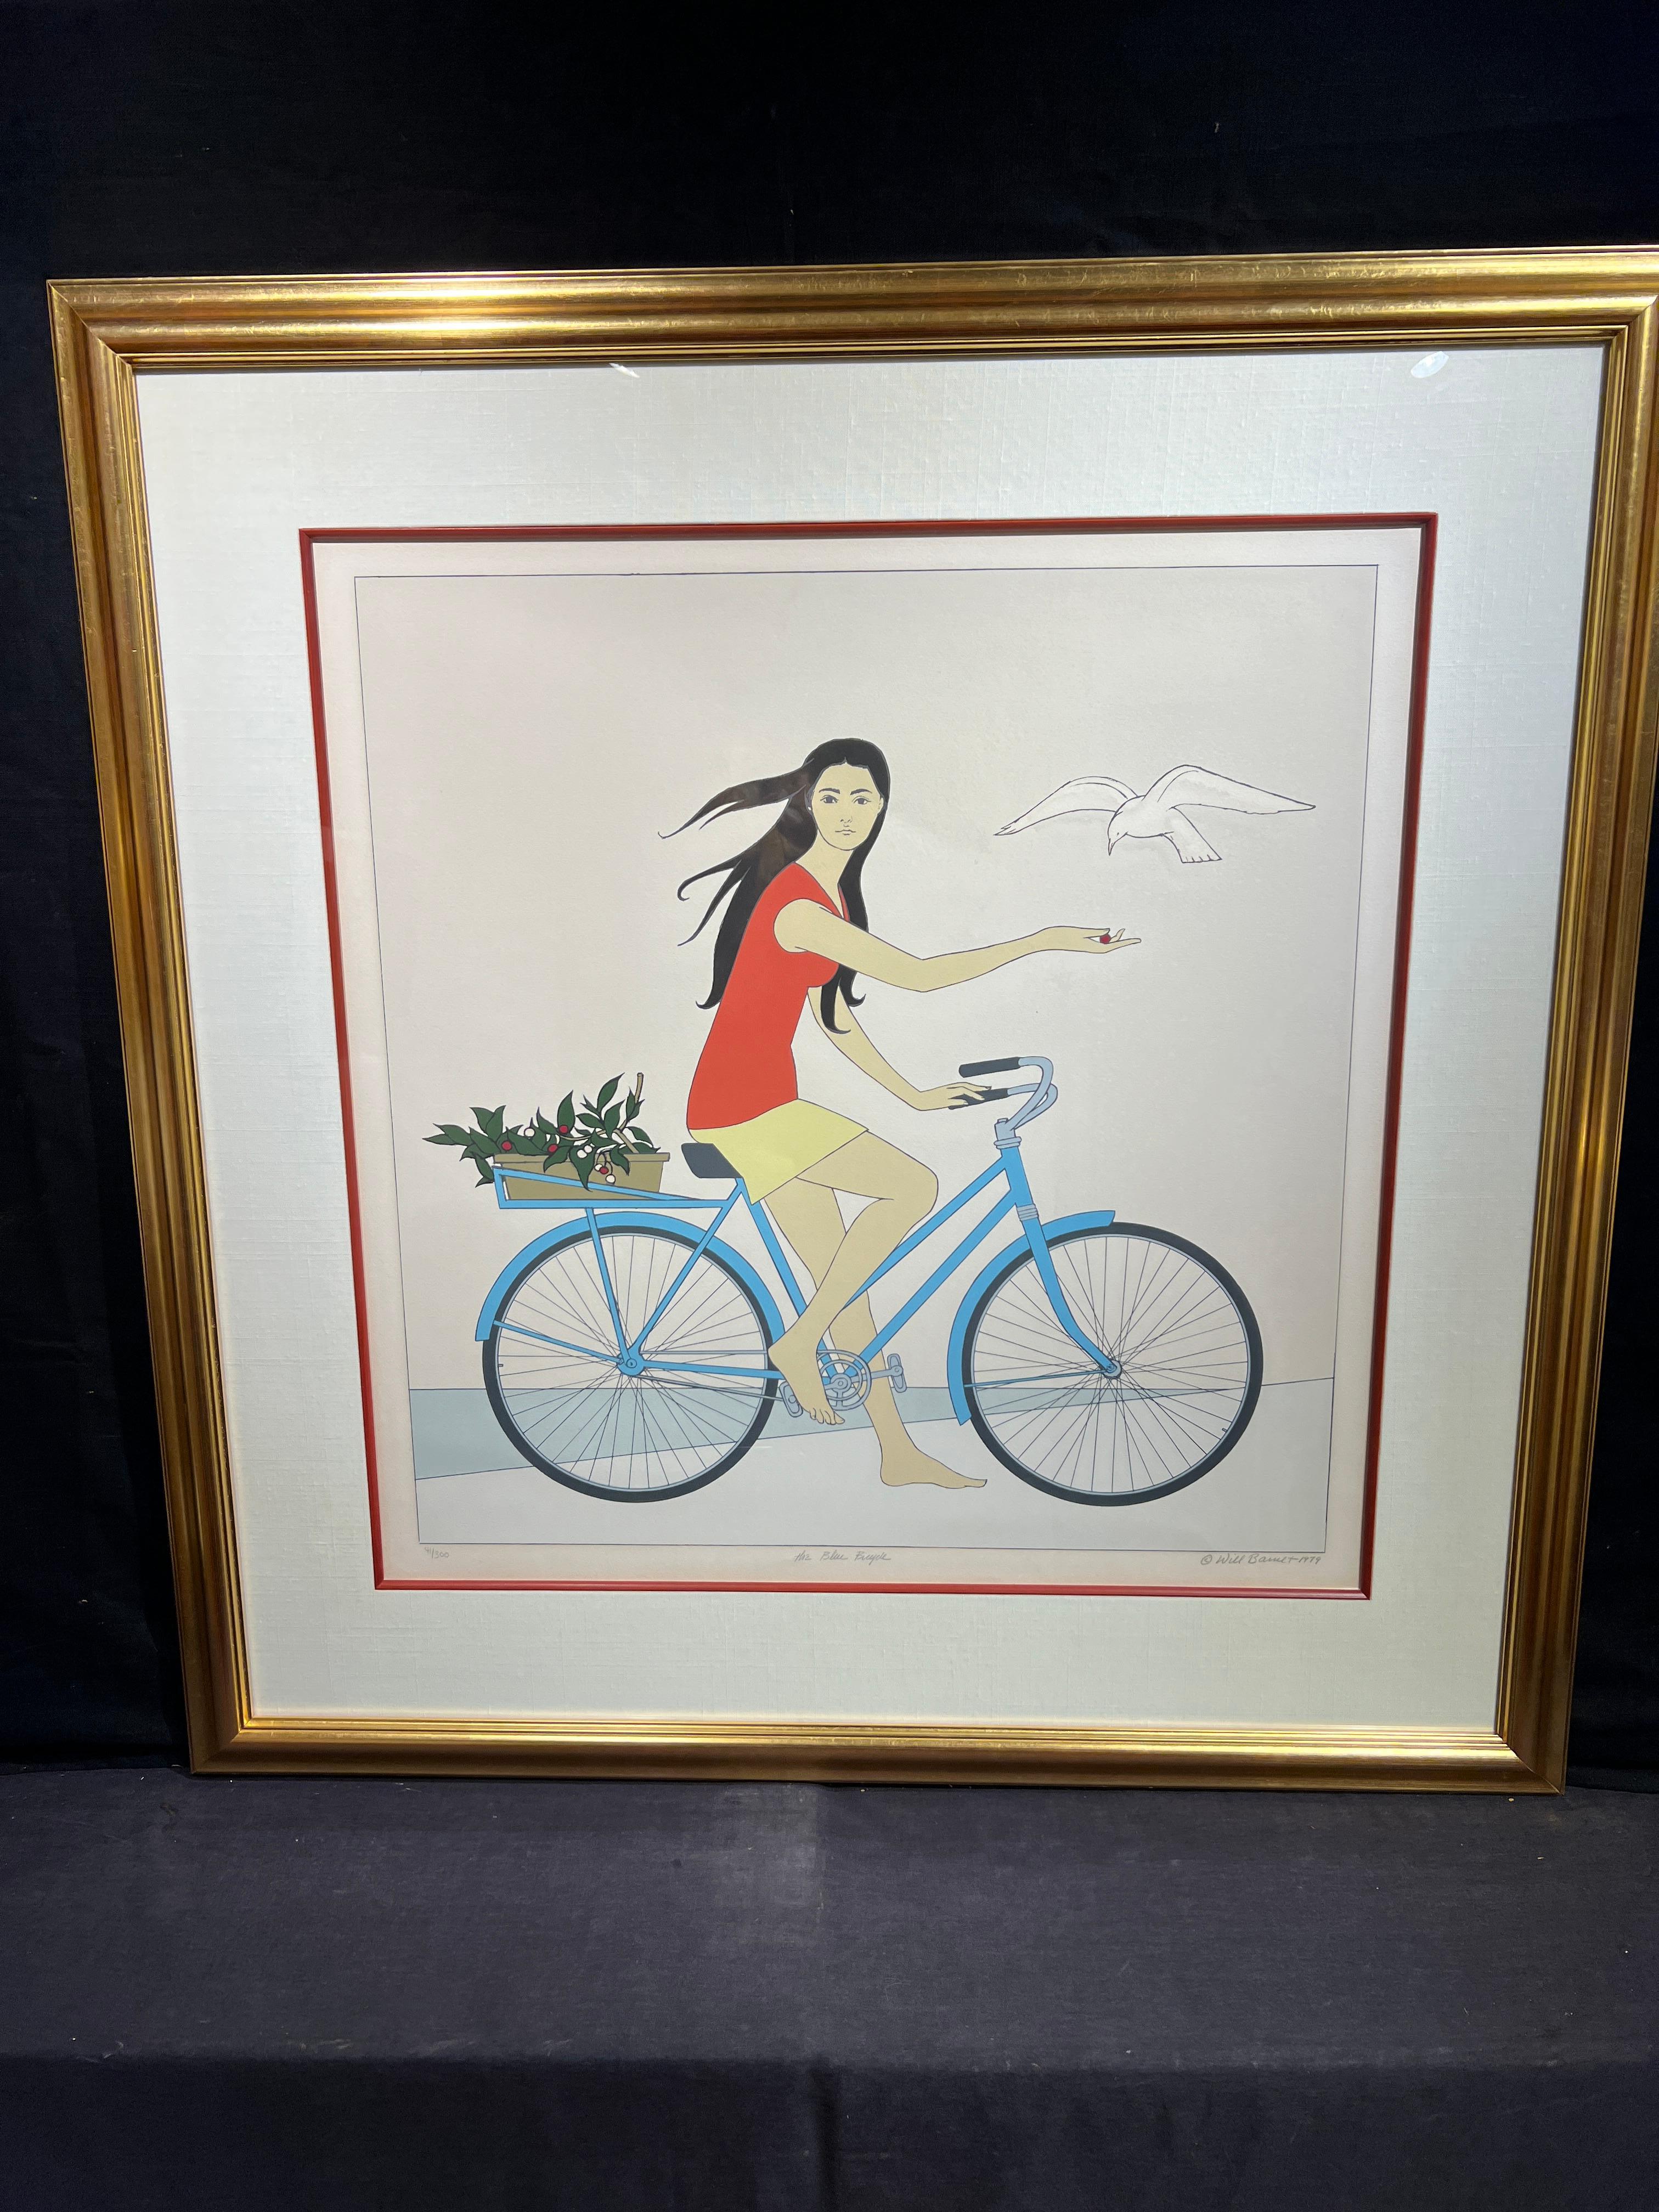 The Blue Bicycle - American Modern Print by Will Barnet